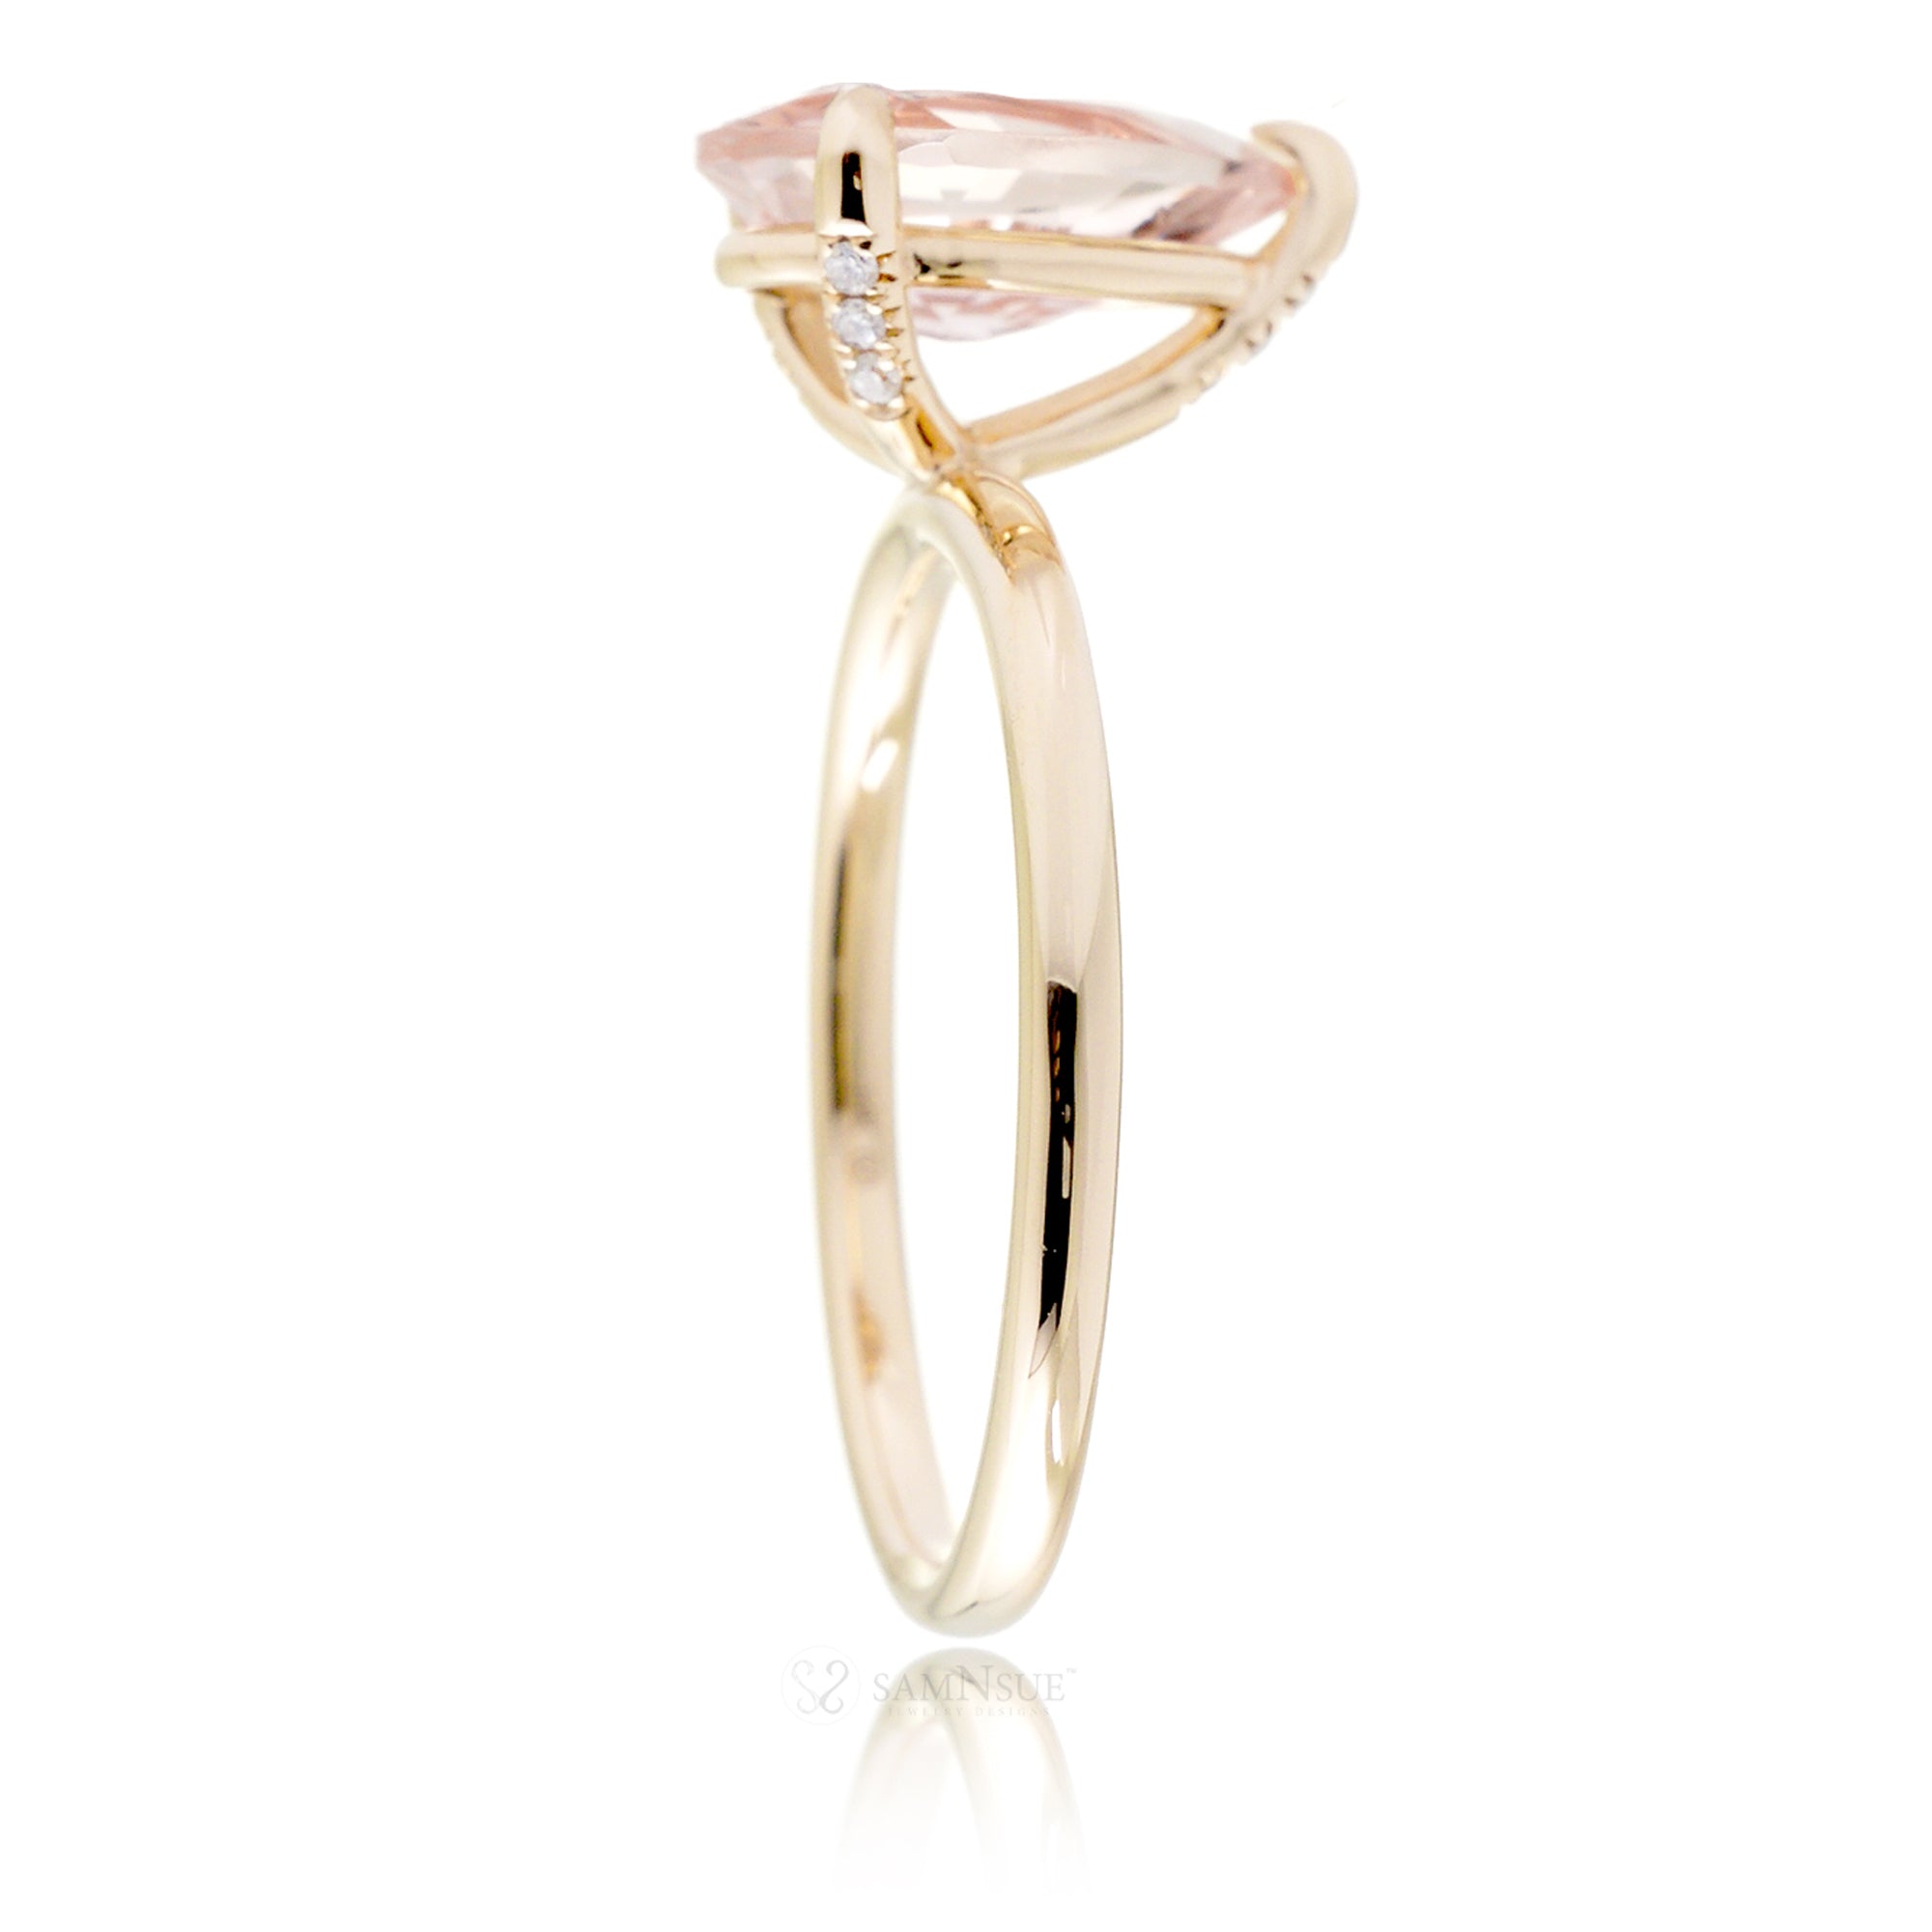 Pear morganite solid band engagement ring yellow gold - The Ava